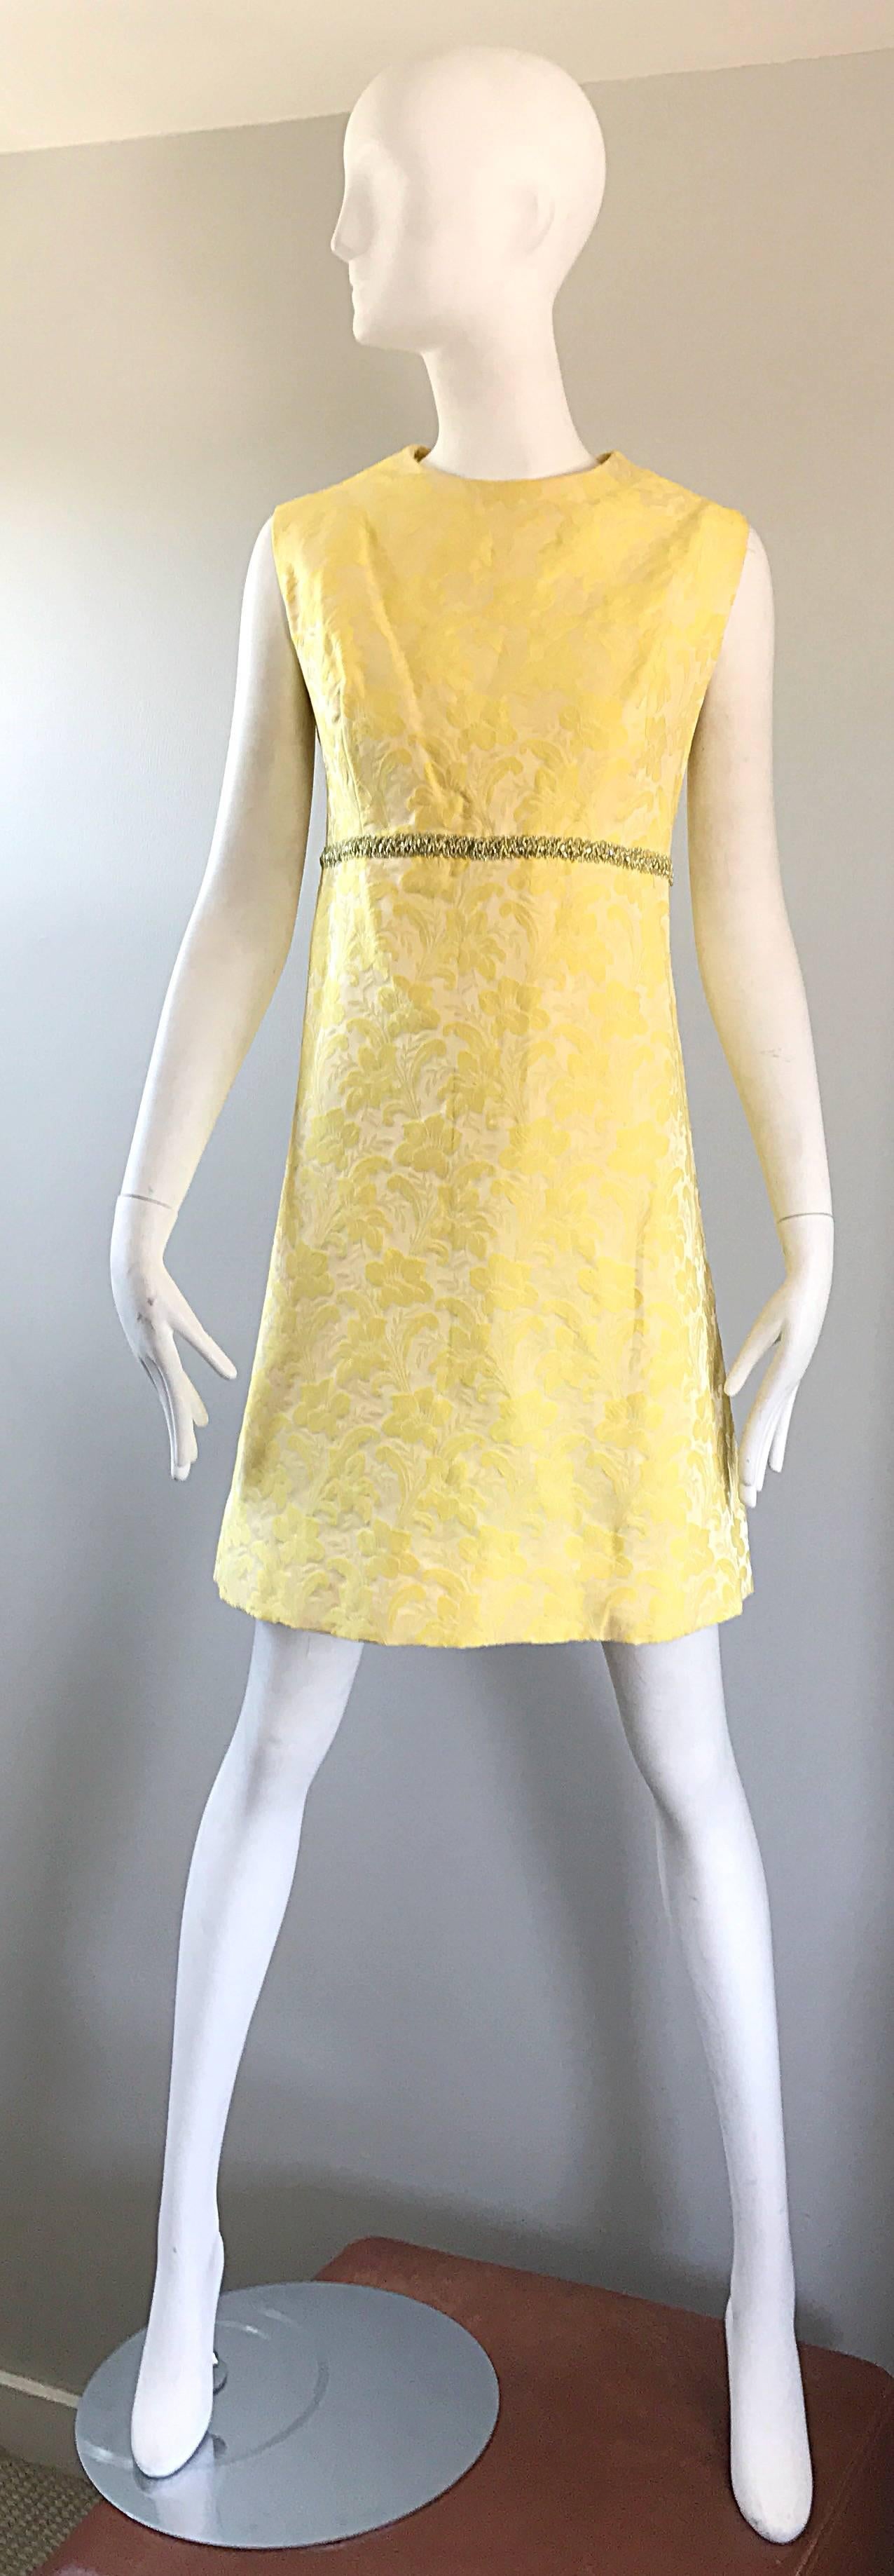 Chic 60s vintage MADEMOISELLE canary yellow silk brocade A-Line dress and coat ensemble! Dress features a fitted bodice with a bell shaped skirt. Gold metallic embroidery detail at waist. Hidden. Metal zipper up the back with hook-and-eye closure.